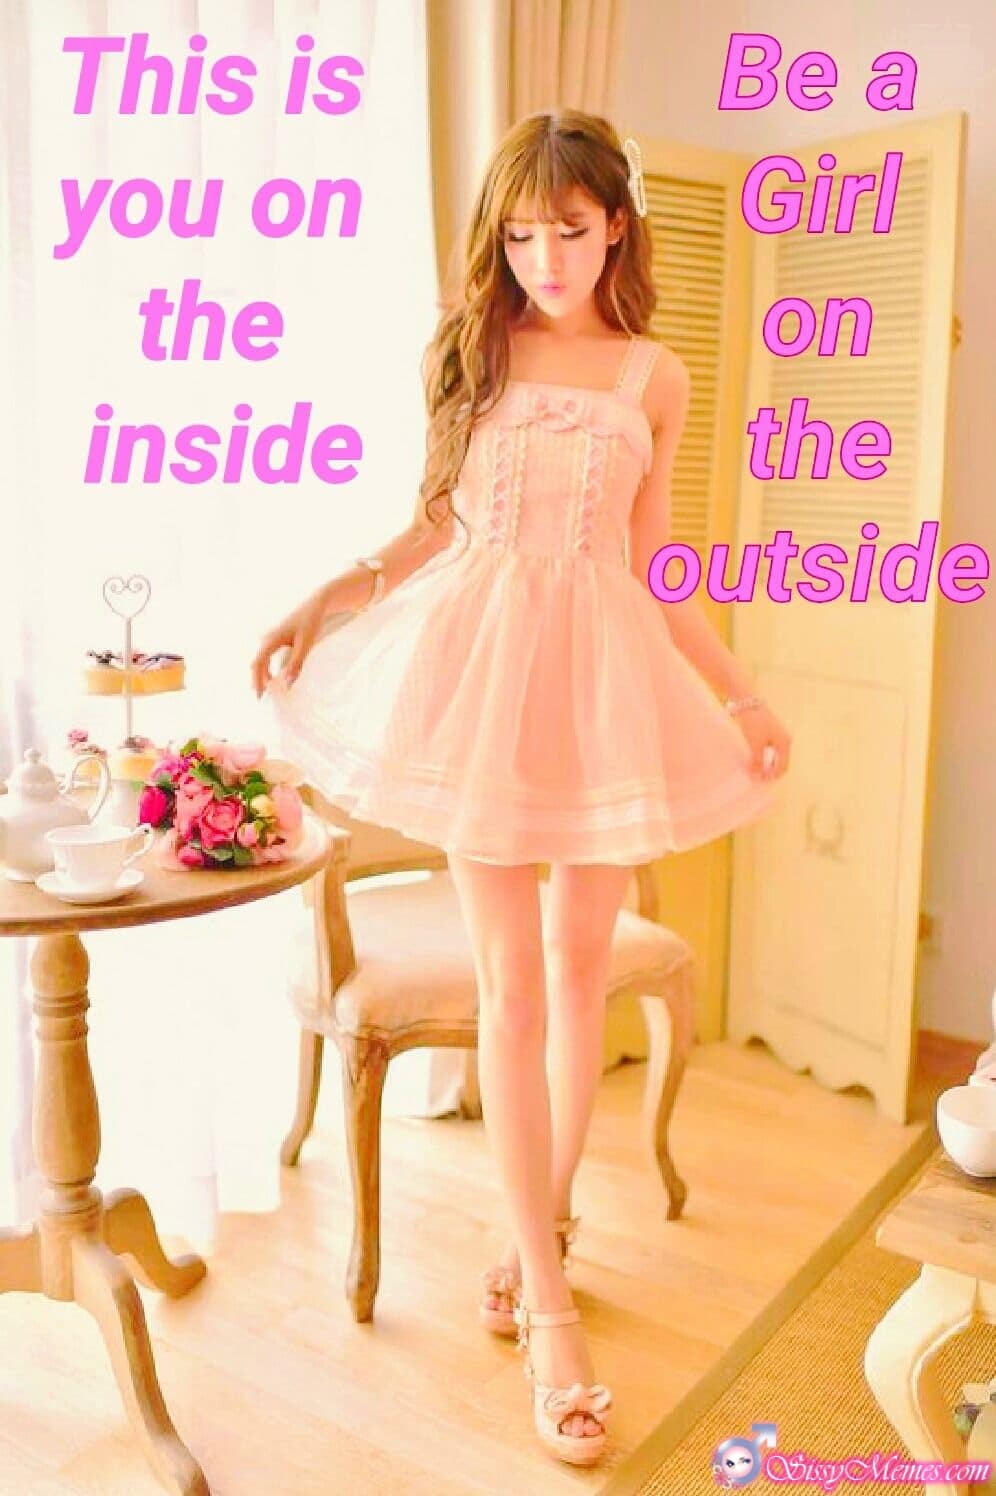 Feminization Femboy Asian sissy caption: This is you on the inside. Be a Girl on the outside Asian Cd in a Beautiful Girly Dress